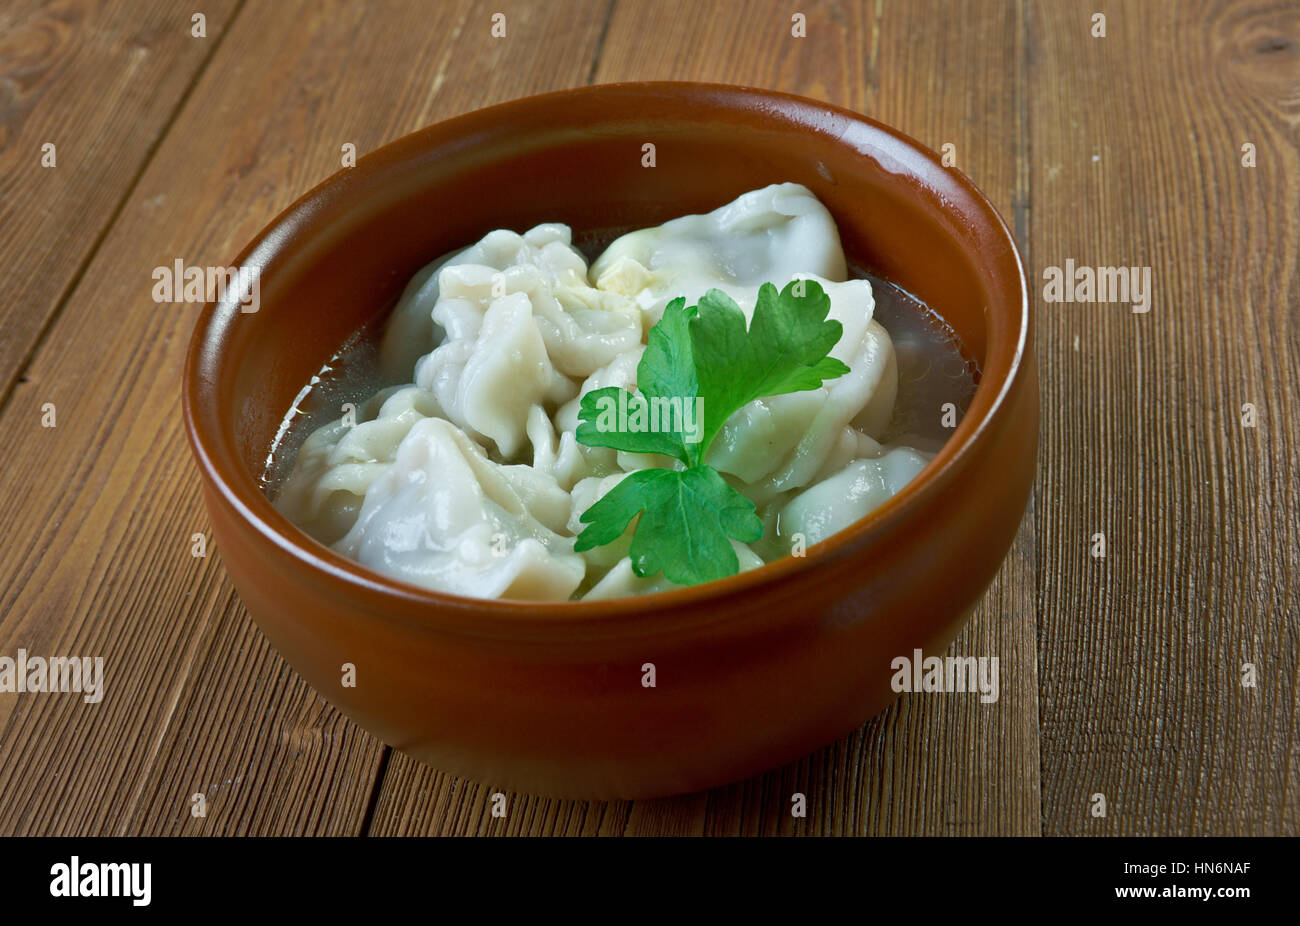 Kreplach  small Jewish dumplings filled with ground meat, mashed potatoes or another filling. Stock Photo